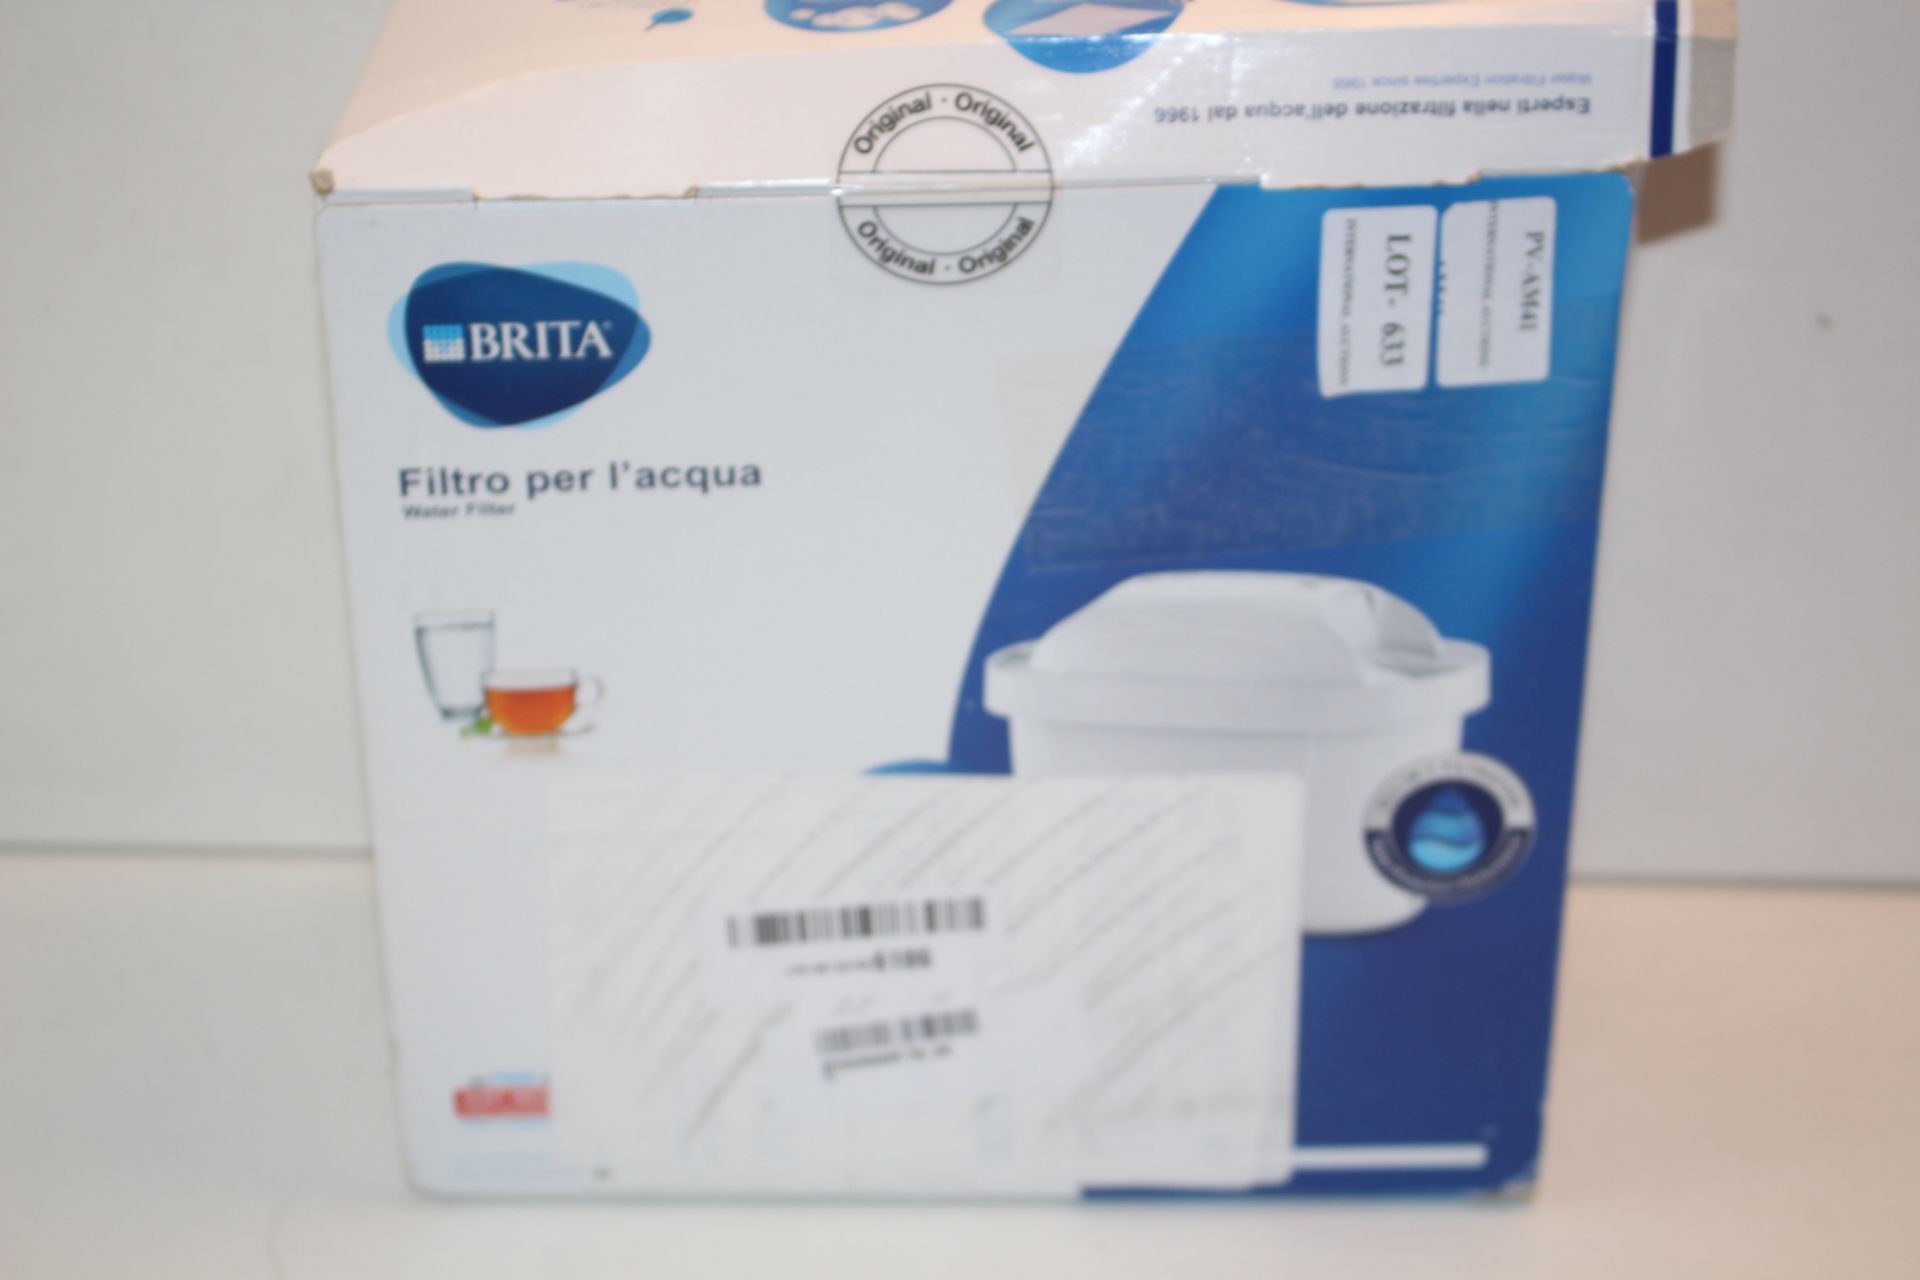 BOXED BRITA FILTERS Condition ReportAppraisal Available on Request- All Items are Unchecked/Untested